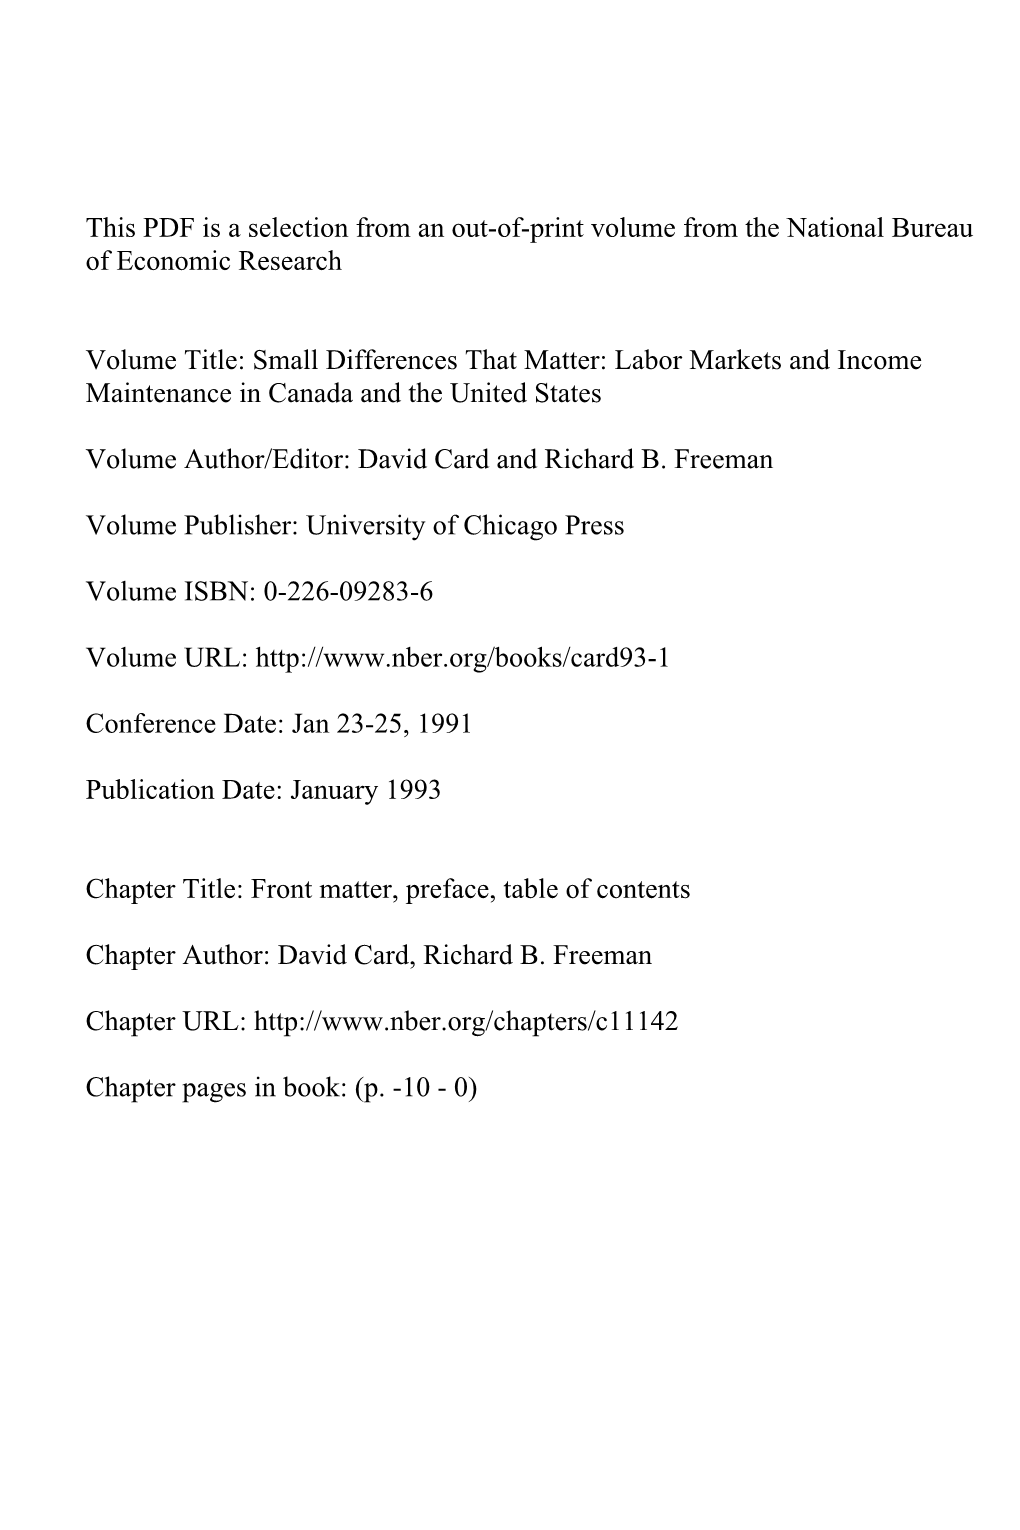 Front Matter, Preface, Table of Contents